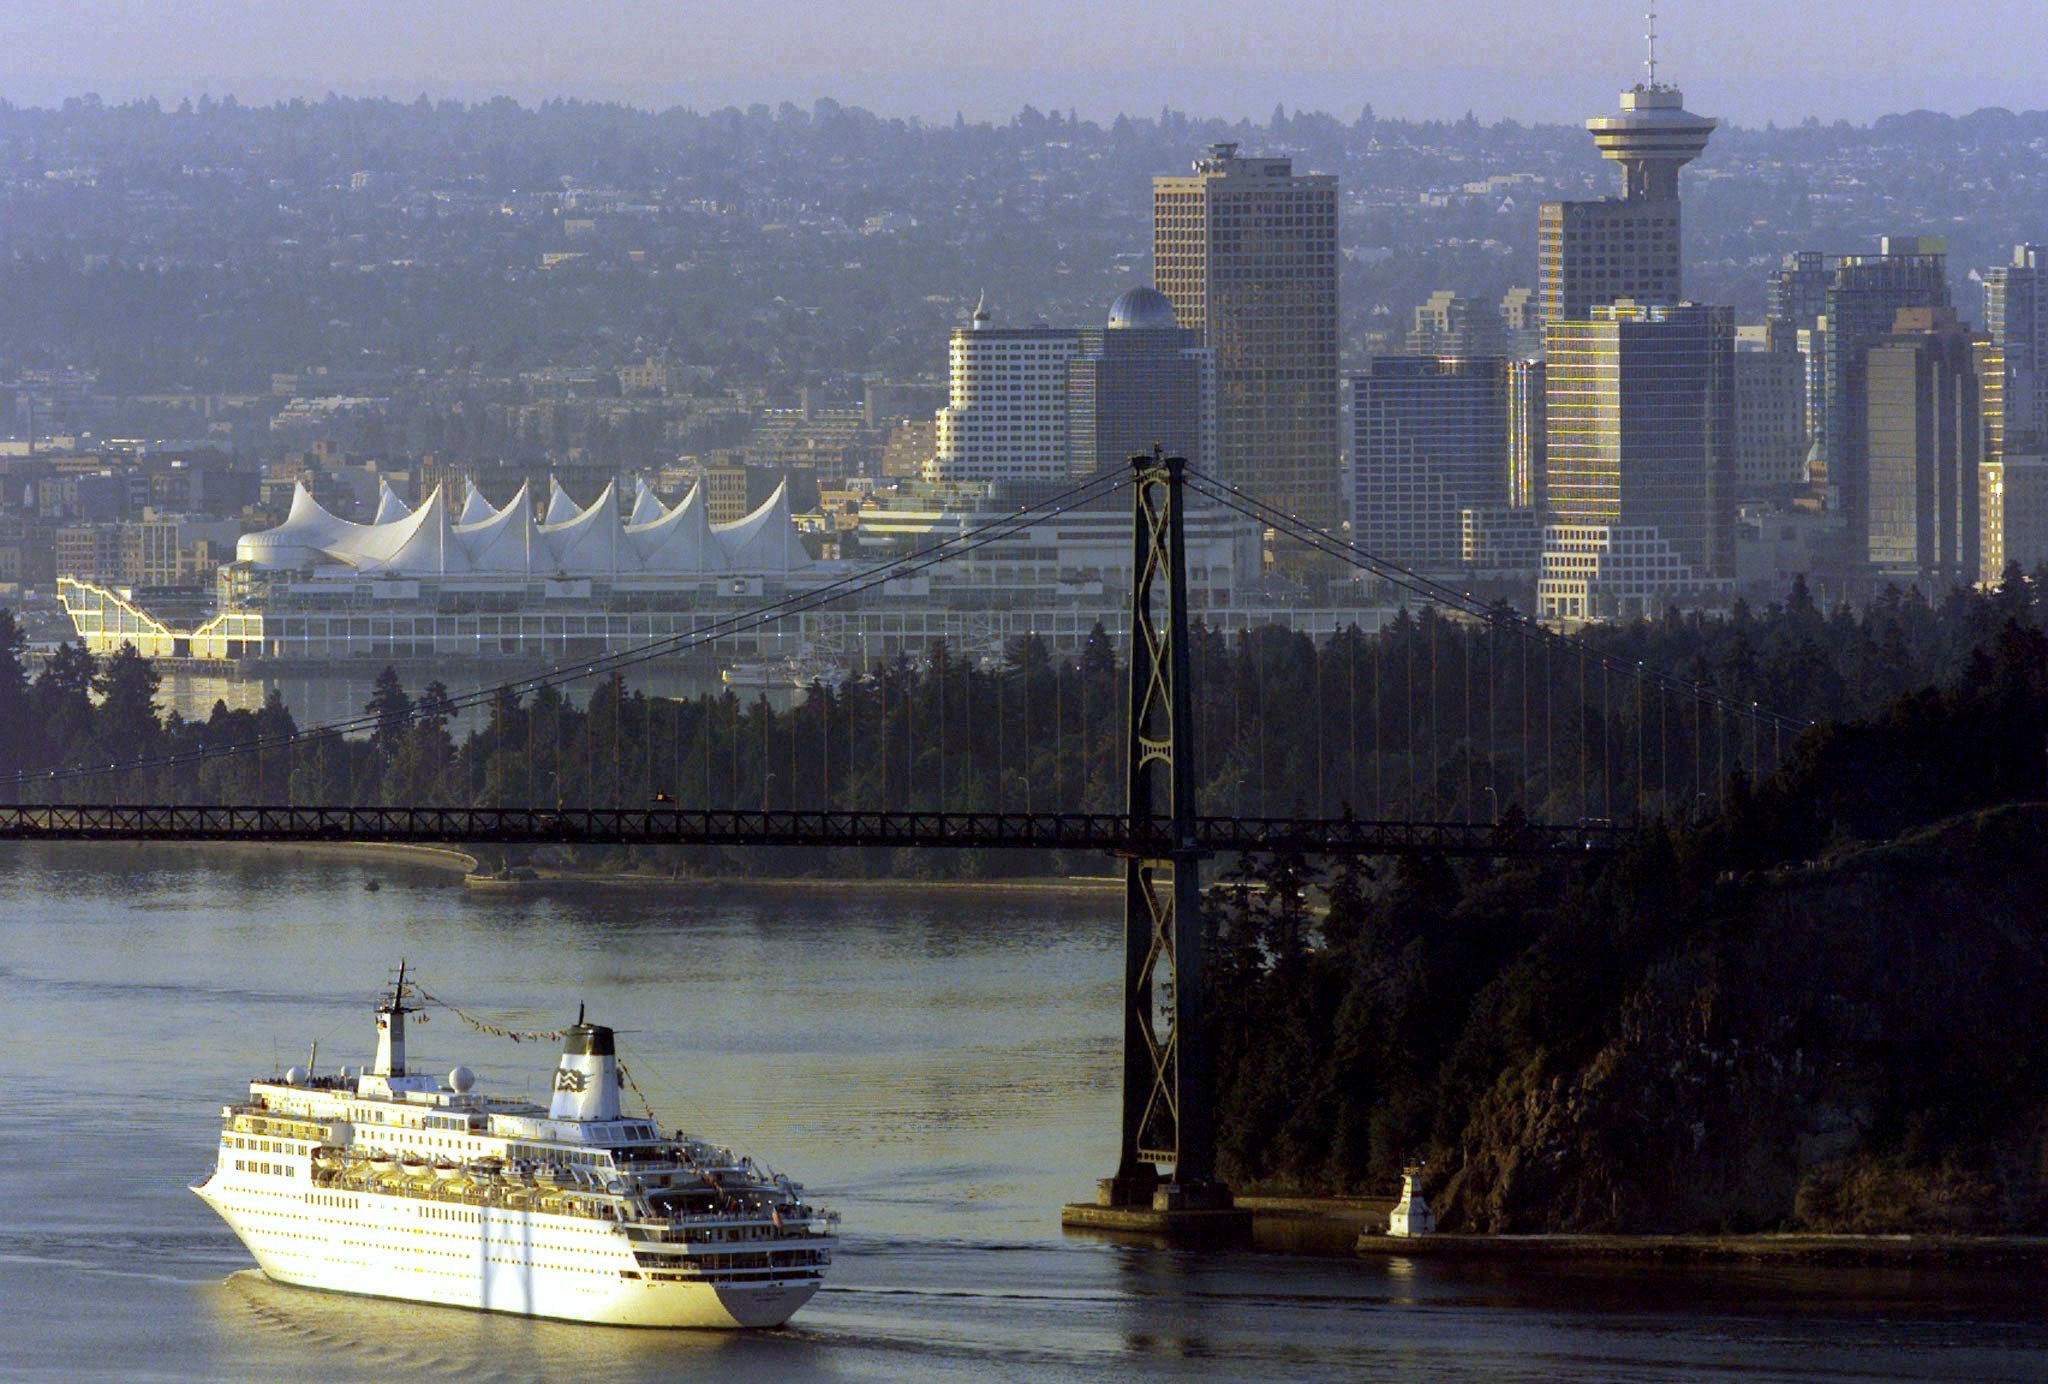 A cruise ship arriving from Alaska makes its way past Stanley Park and under the Lions Gate Bridge as it sails into Vancouver in the early morning of July 27, 1998. REUTERS/Mike Blake